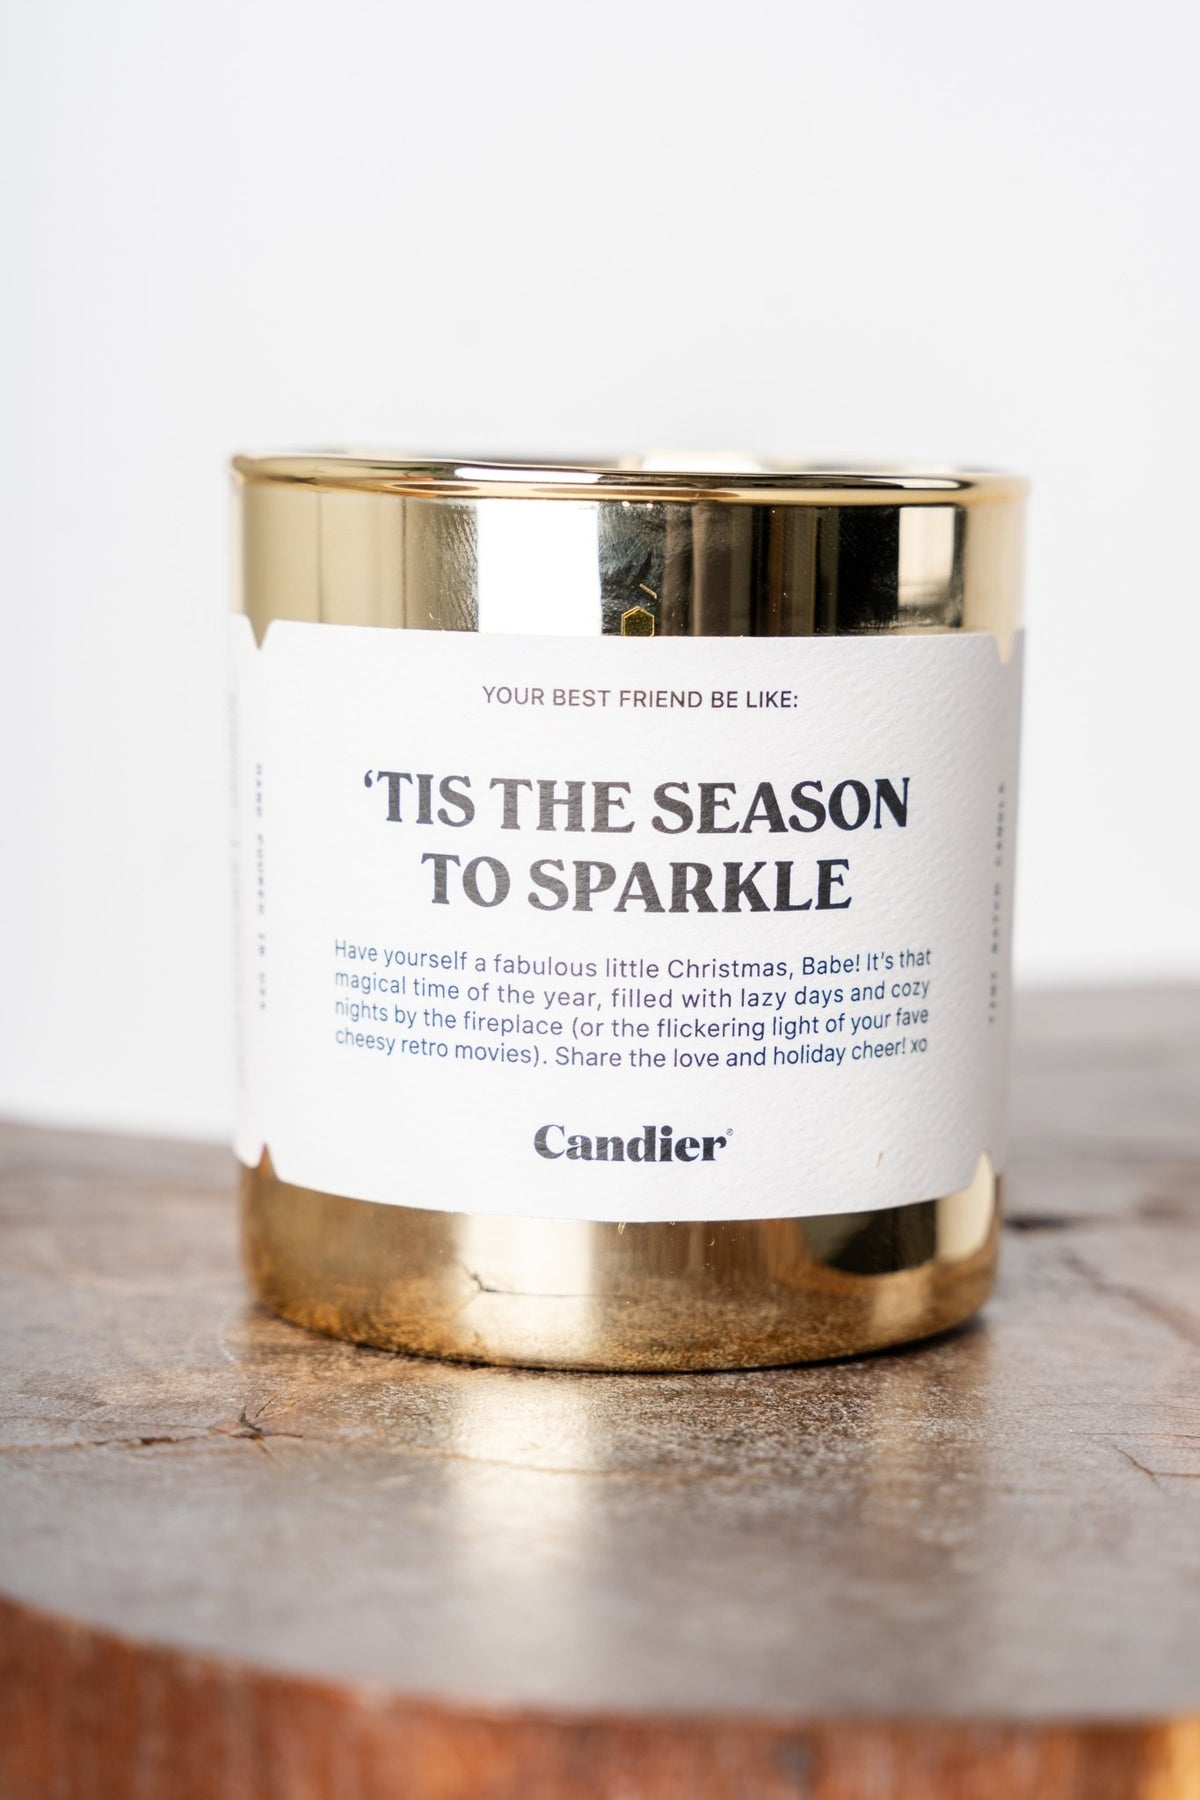 'Tis the season to sparkle Candier 9 oz candle - Trendy Holiday Apparel at Lush Fashion Lounge Boutique in Oklahoma City